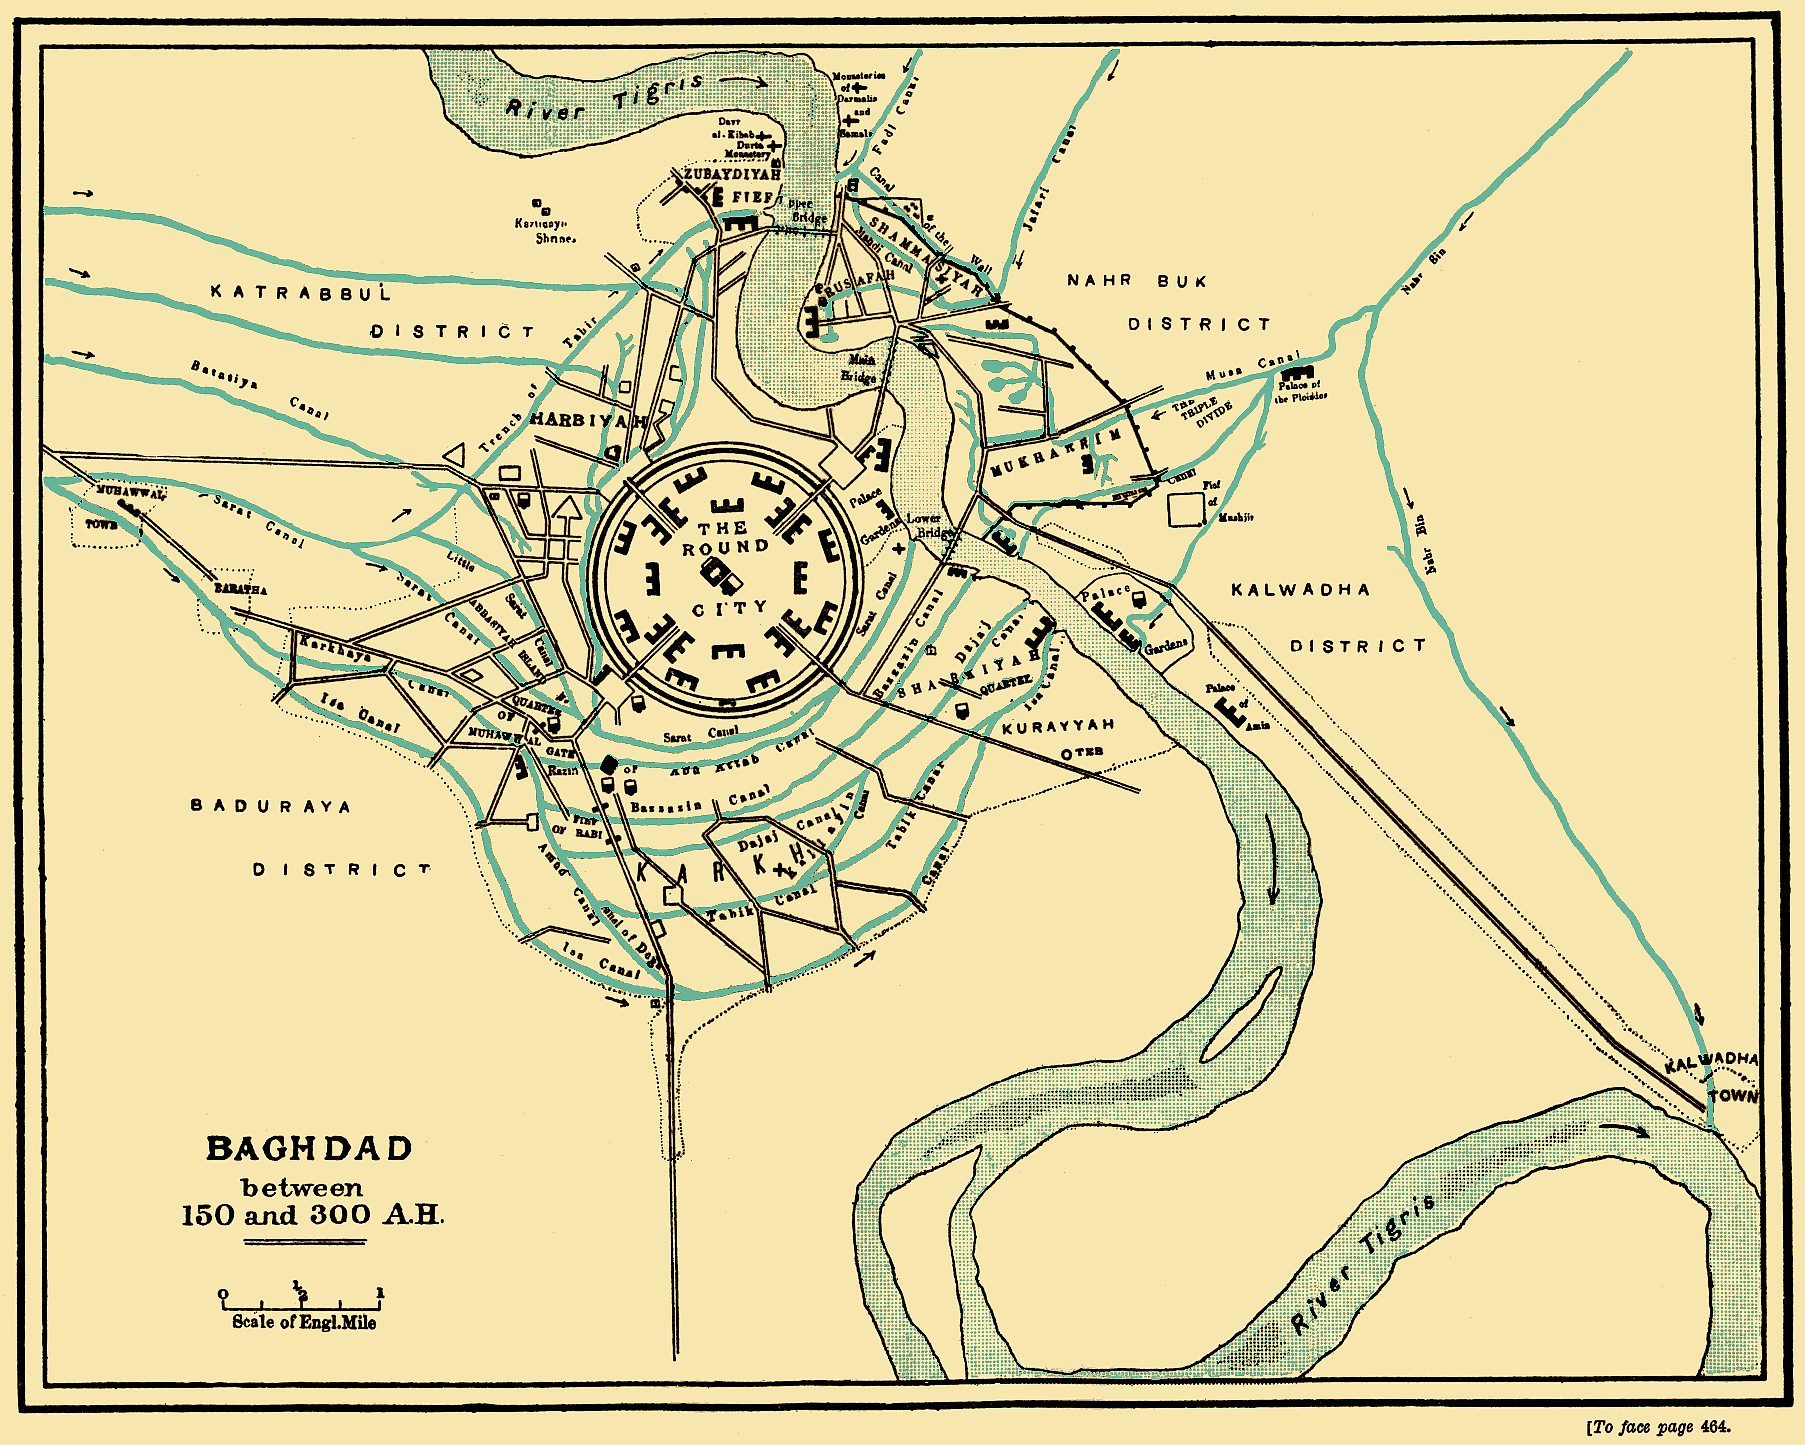 the city of Baghdad when it was ruled by the Abbasid Caliphate between 767 and 912